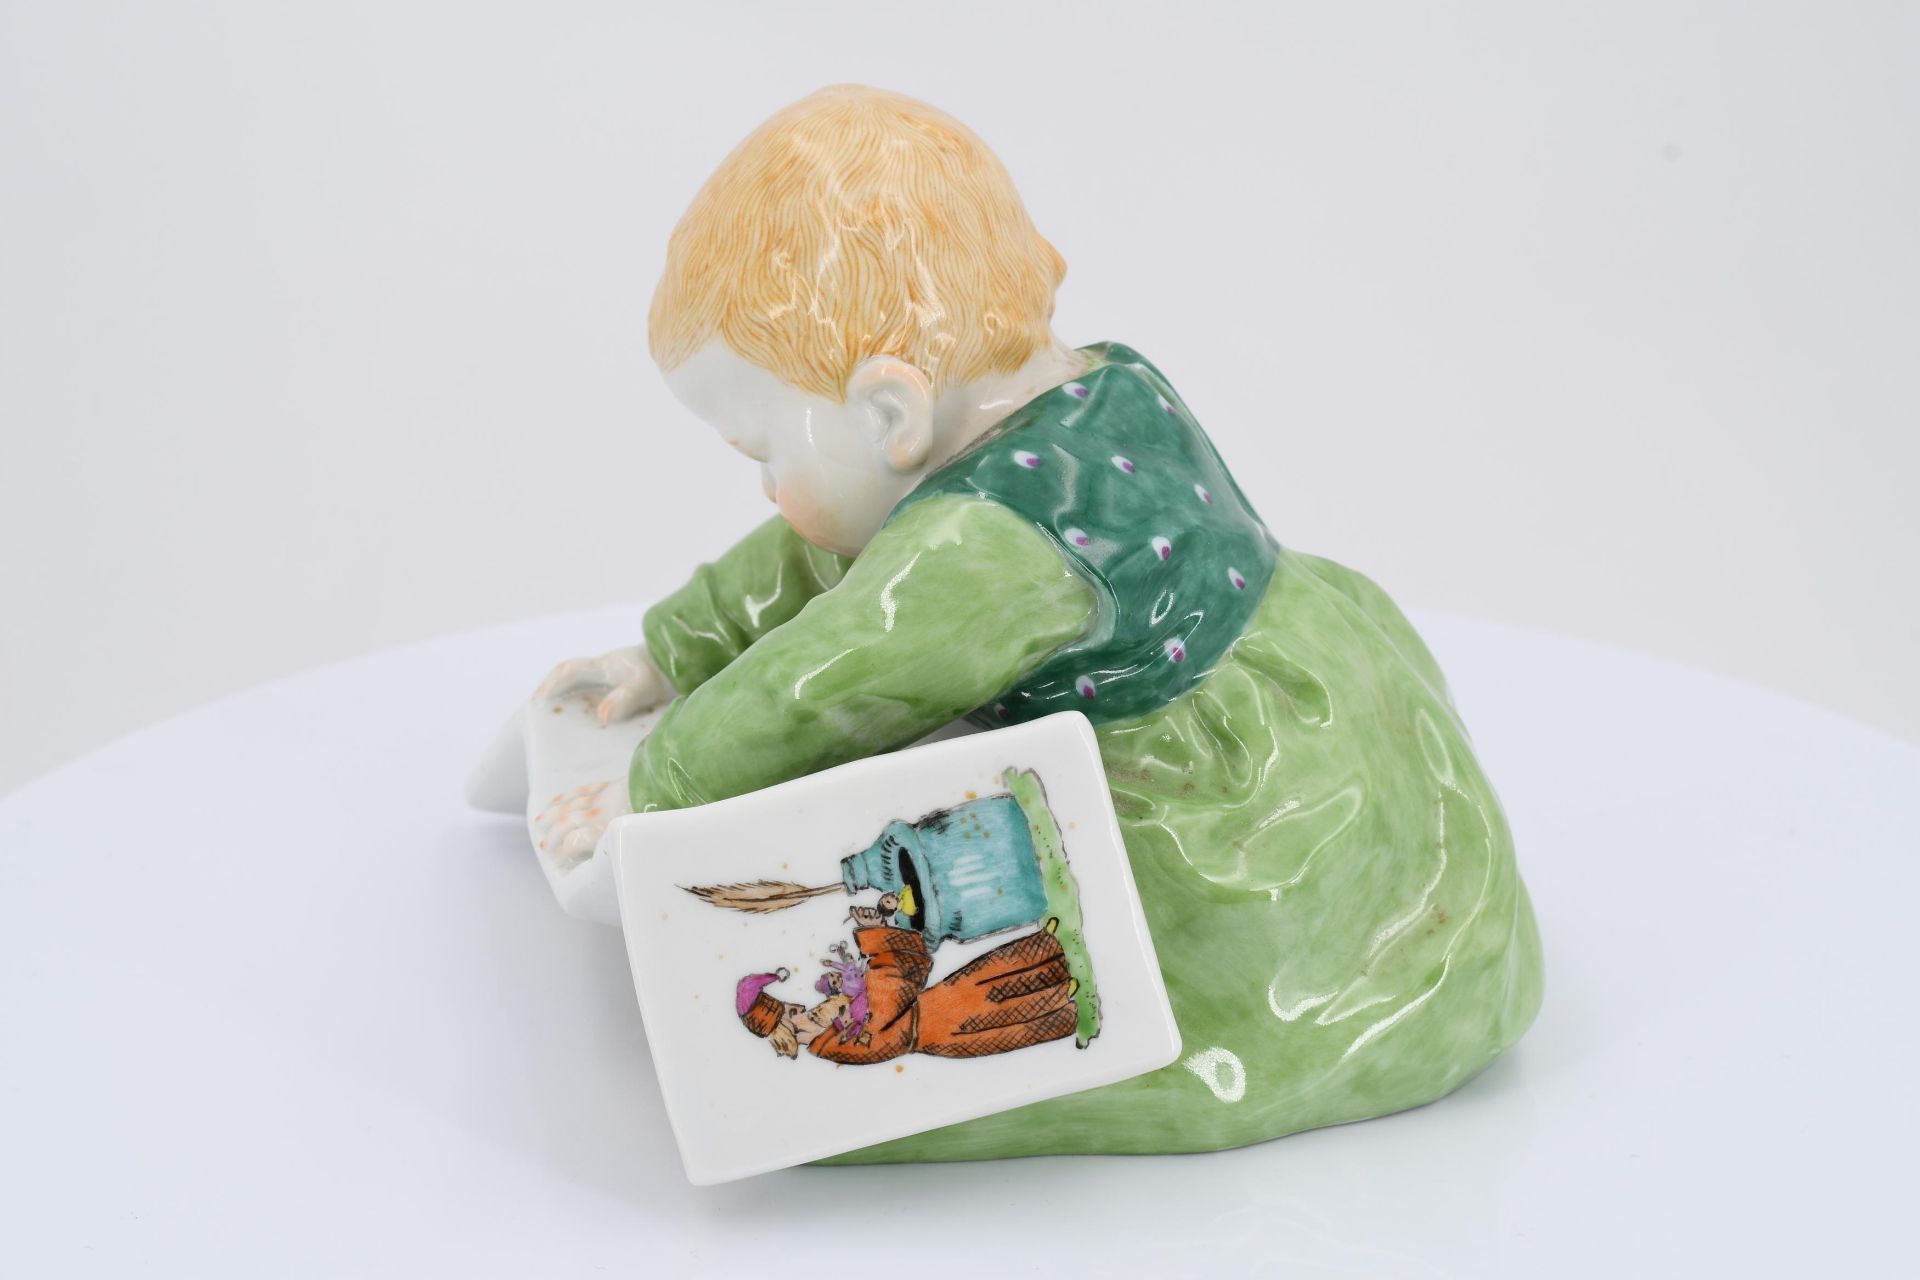 Porcelain figurine of child with storybook - Image 5 of 6